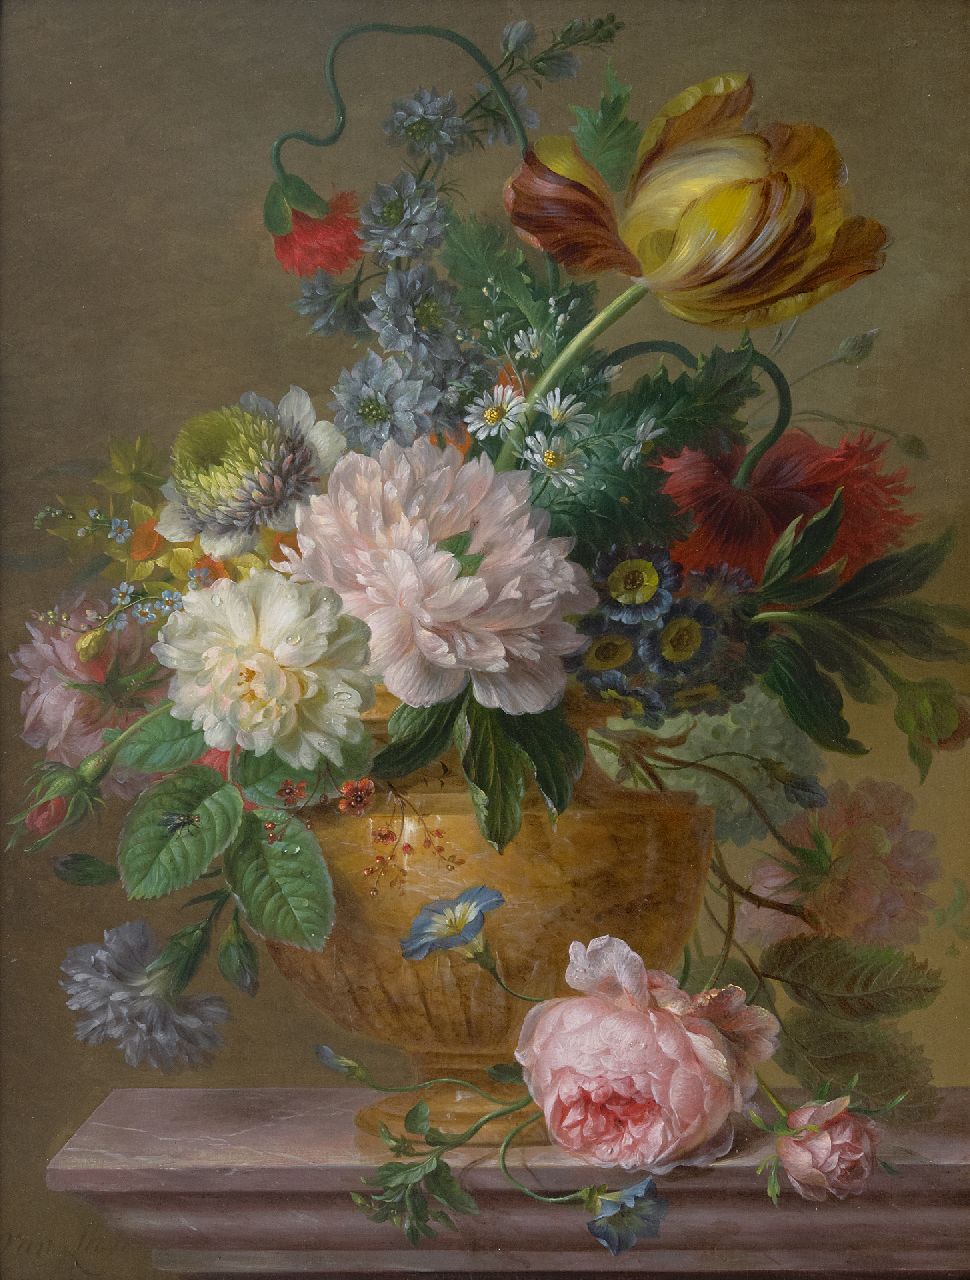 Leen W. van | Willem van Leen, Flower still life with peonies and tulips, oil on panel 48.8 x 36.7 cm, signed l.l.